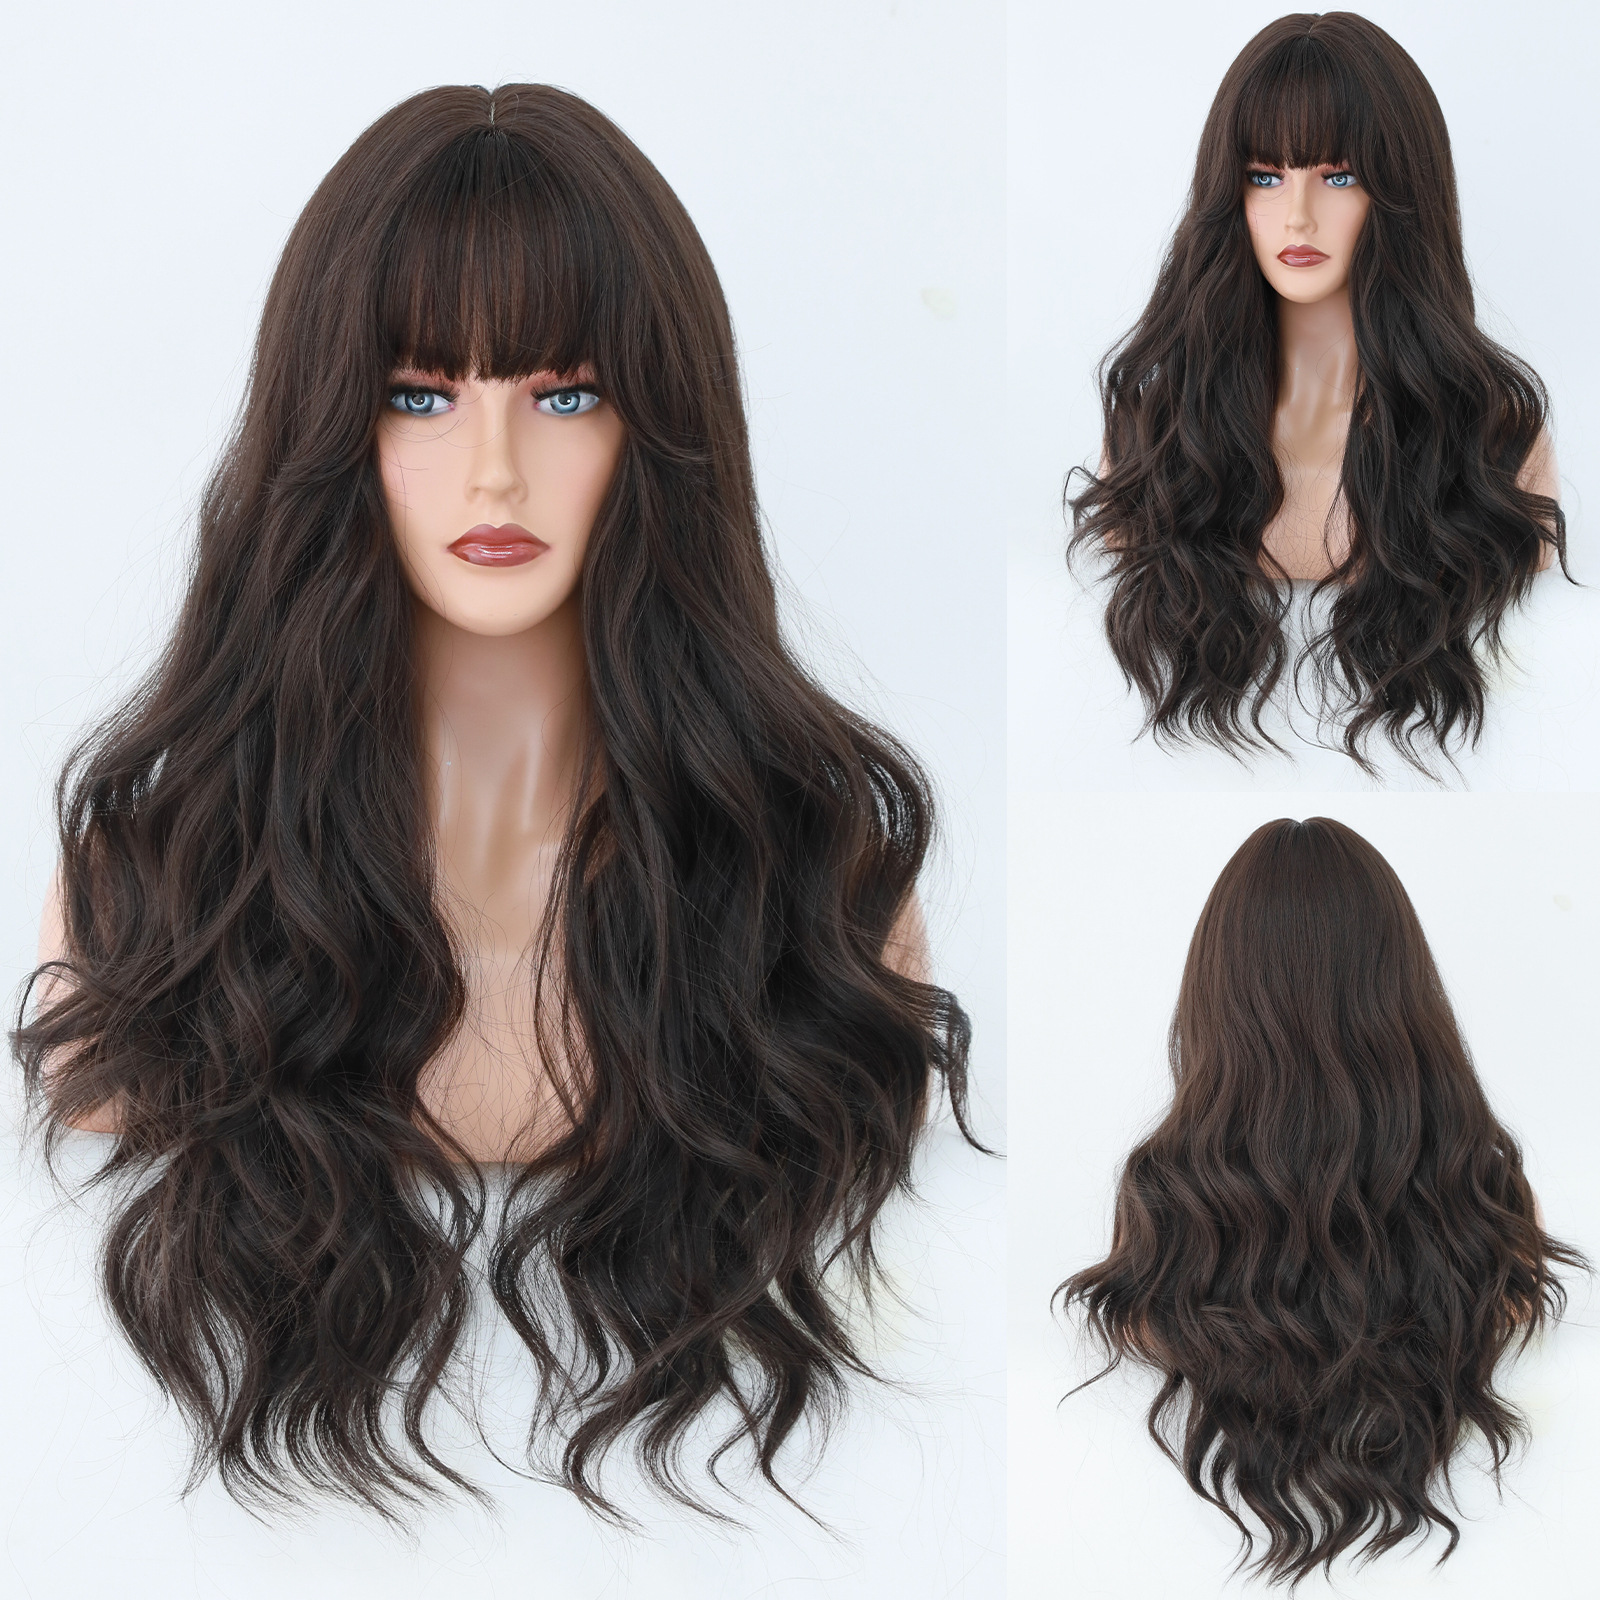 Long curly synthetic wig by Yinraohair in brown with fashionable headband gradient and layered bangs, ready to go